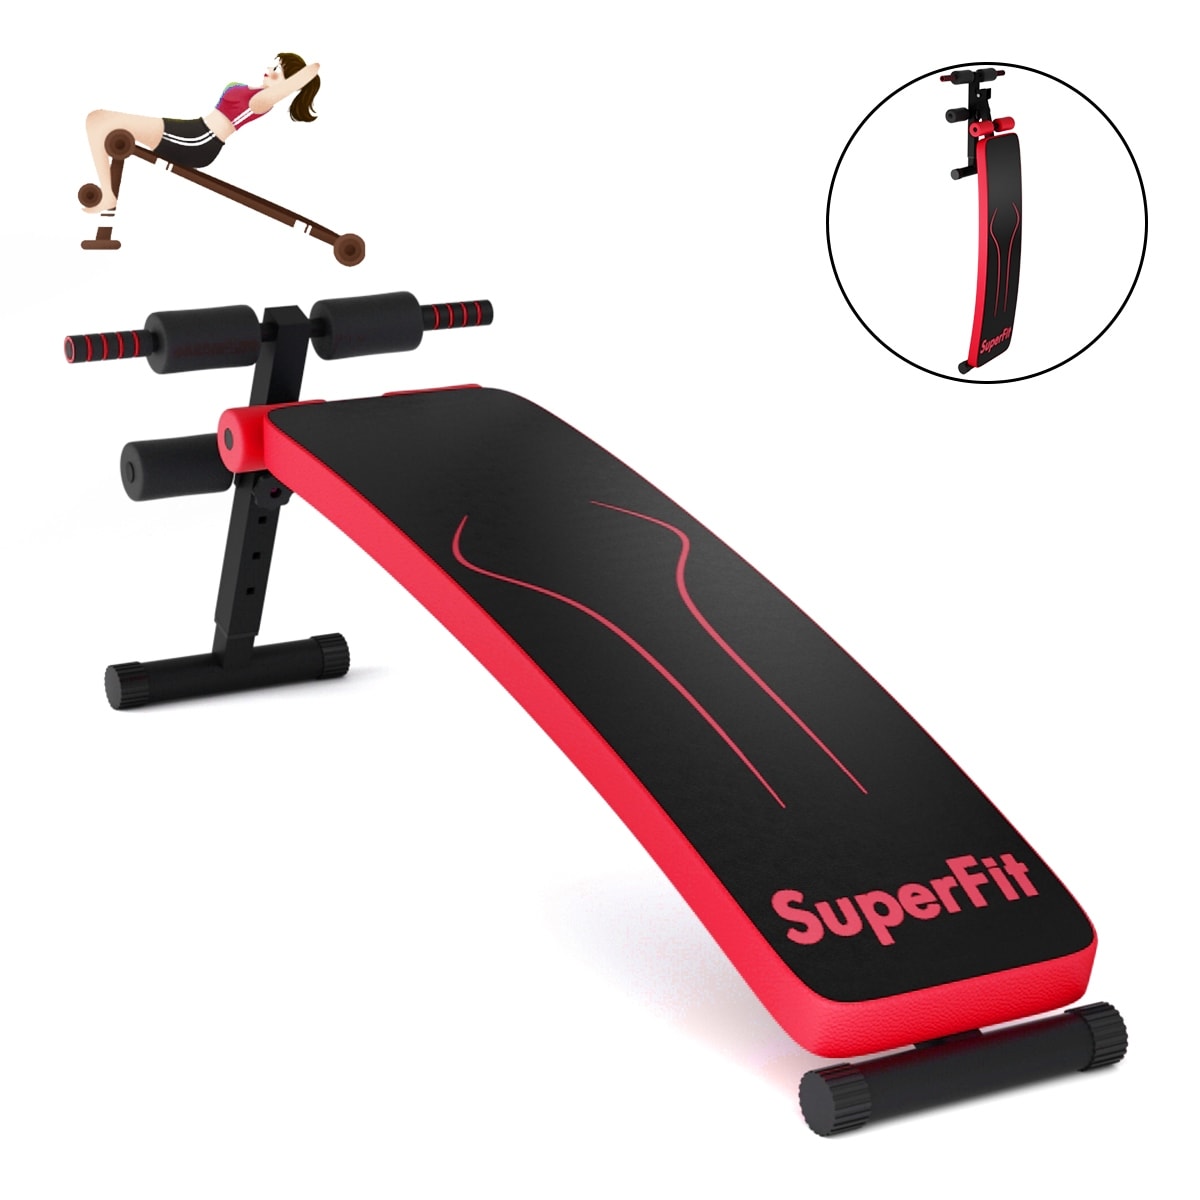 Details about   Folding Sit-ups Board Dumbbell Bench Home Adjustable Height Exercise Settings US 